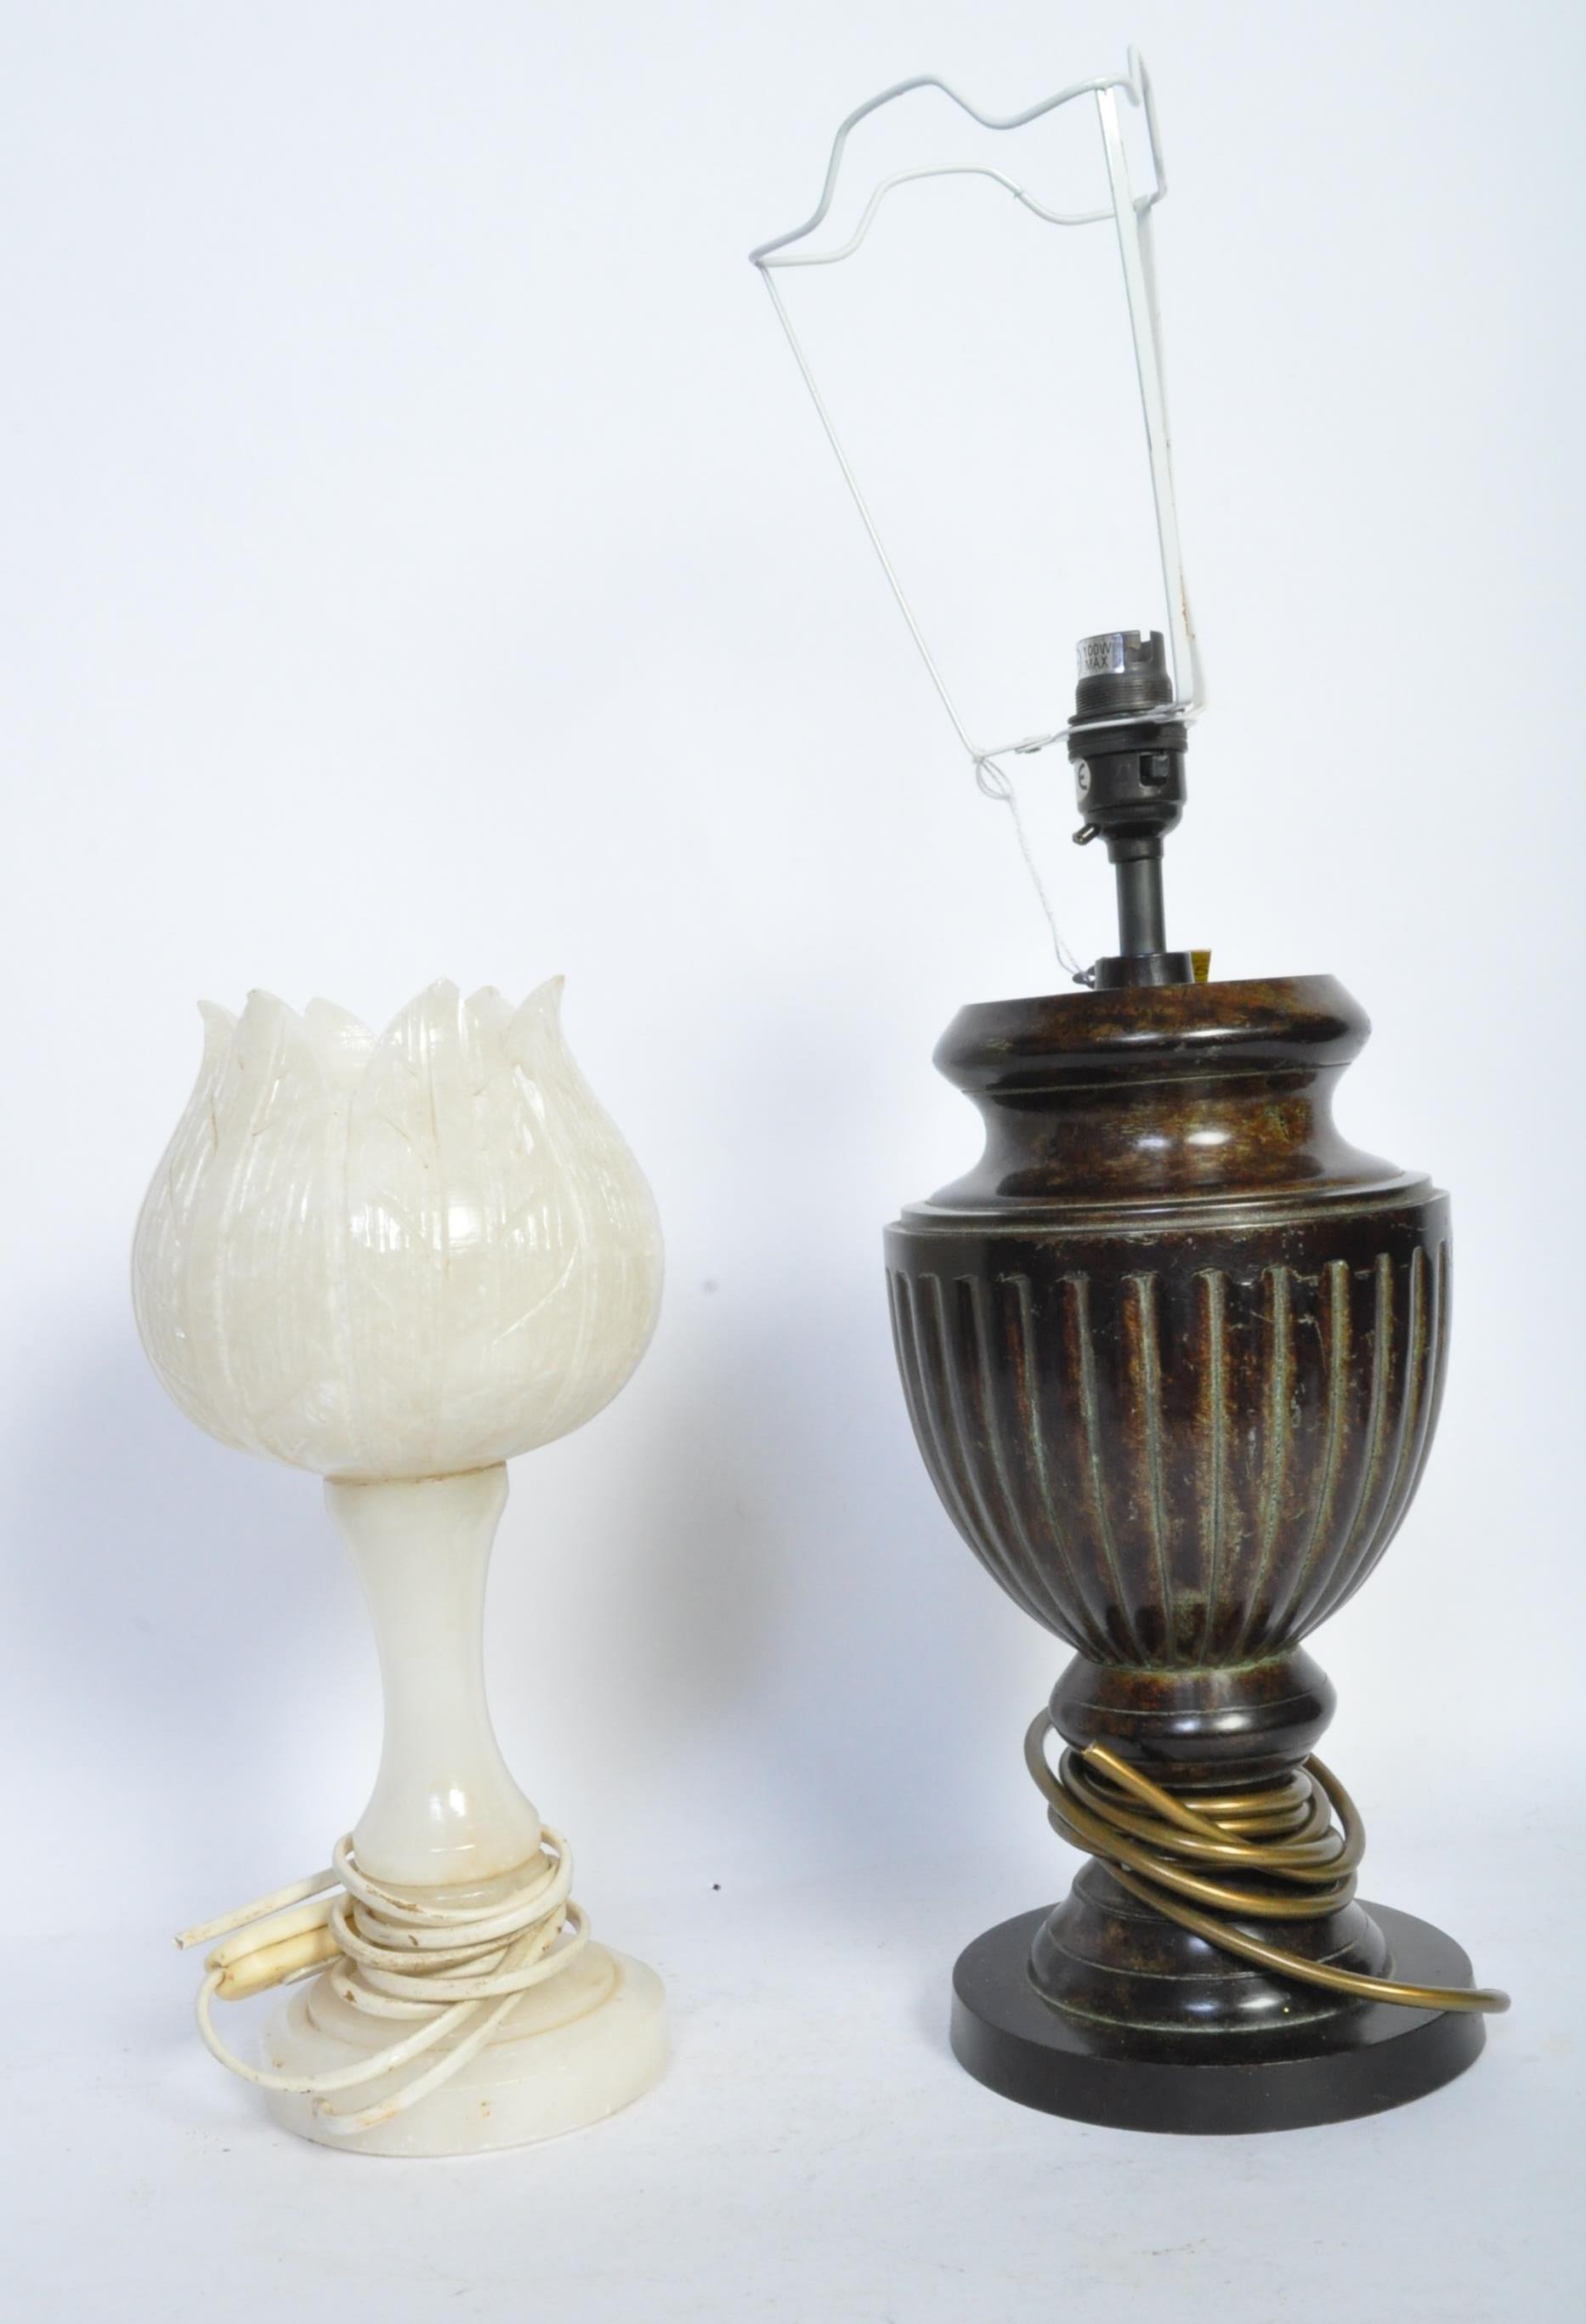 TWO VINTAGE TABLE LAMPS - MARBLE & BRONZE